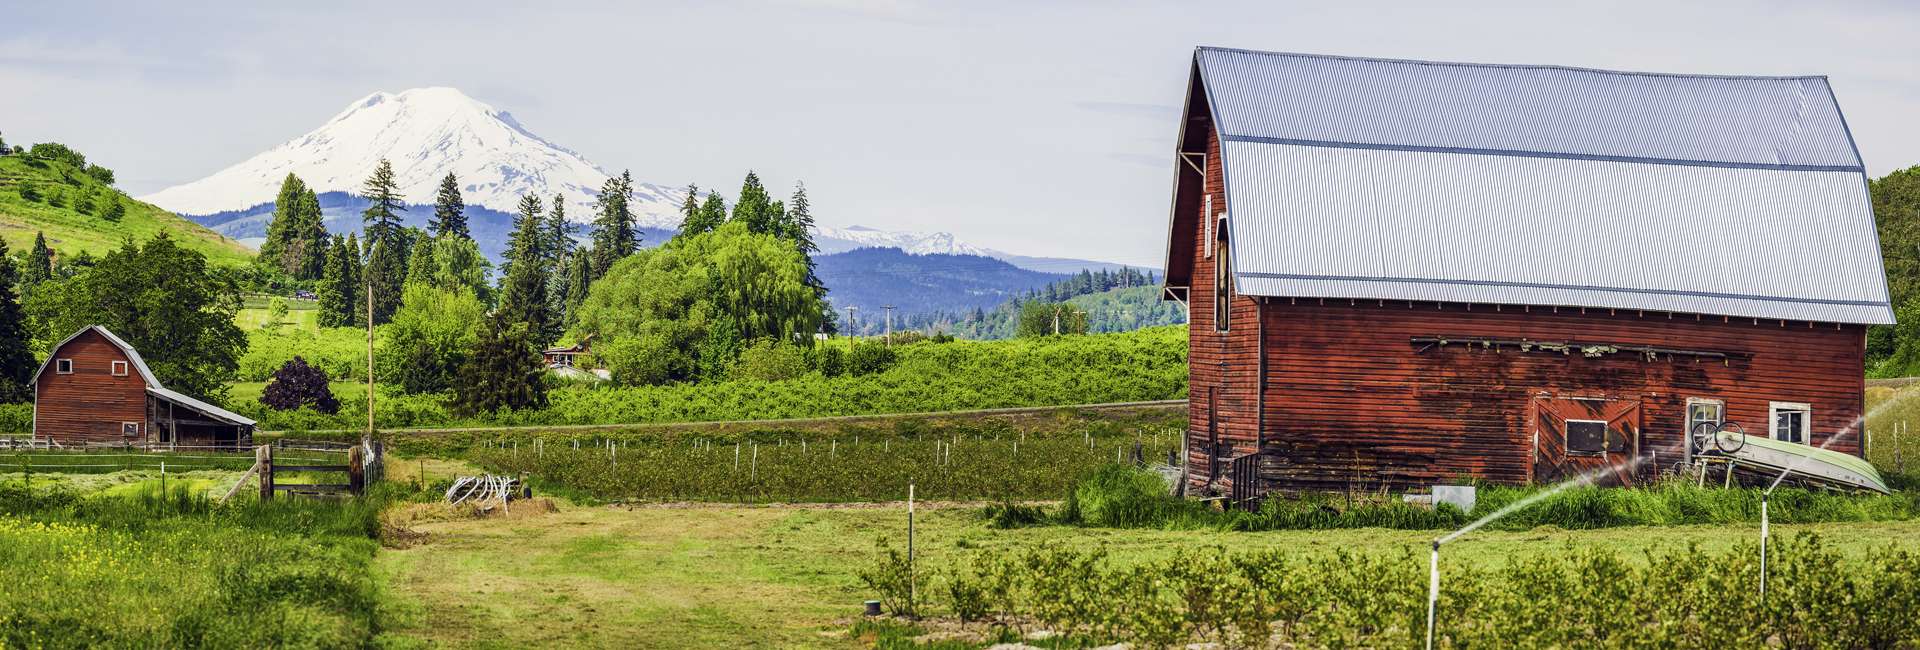 Farm in spring with Mount Rainier in the background.